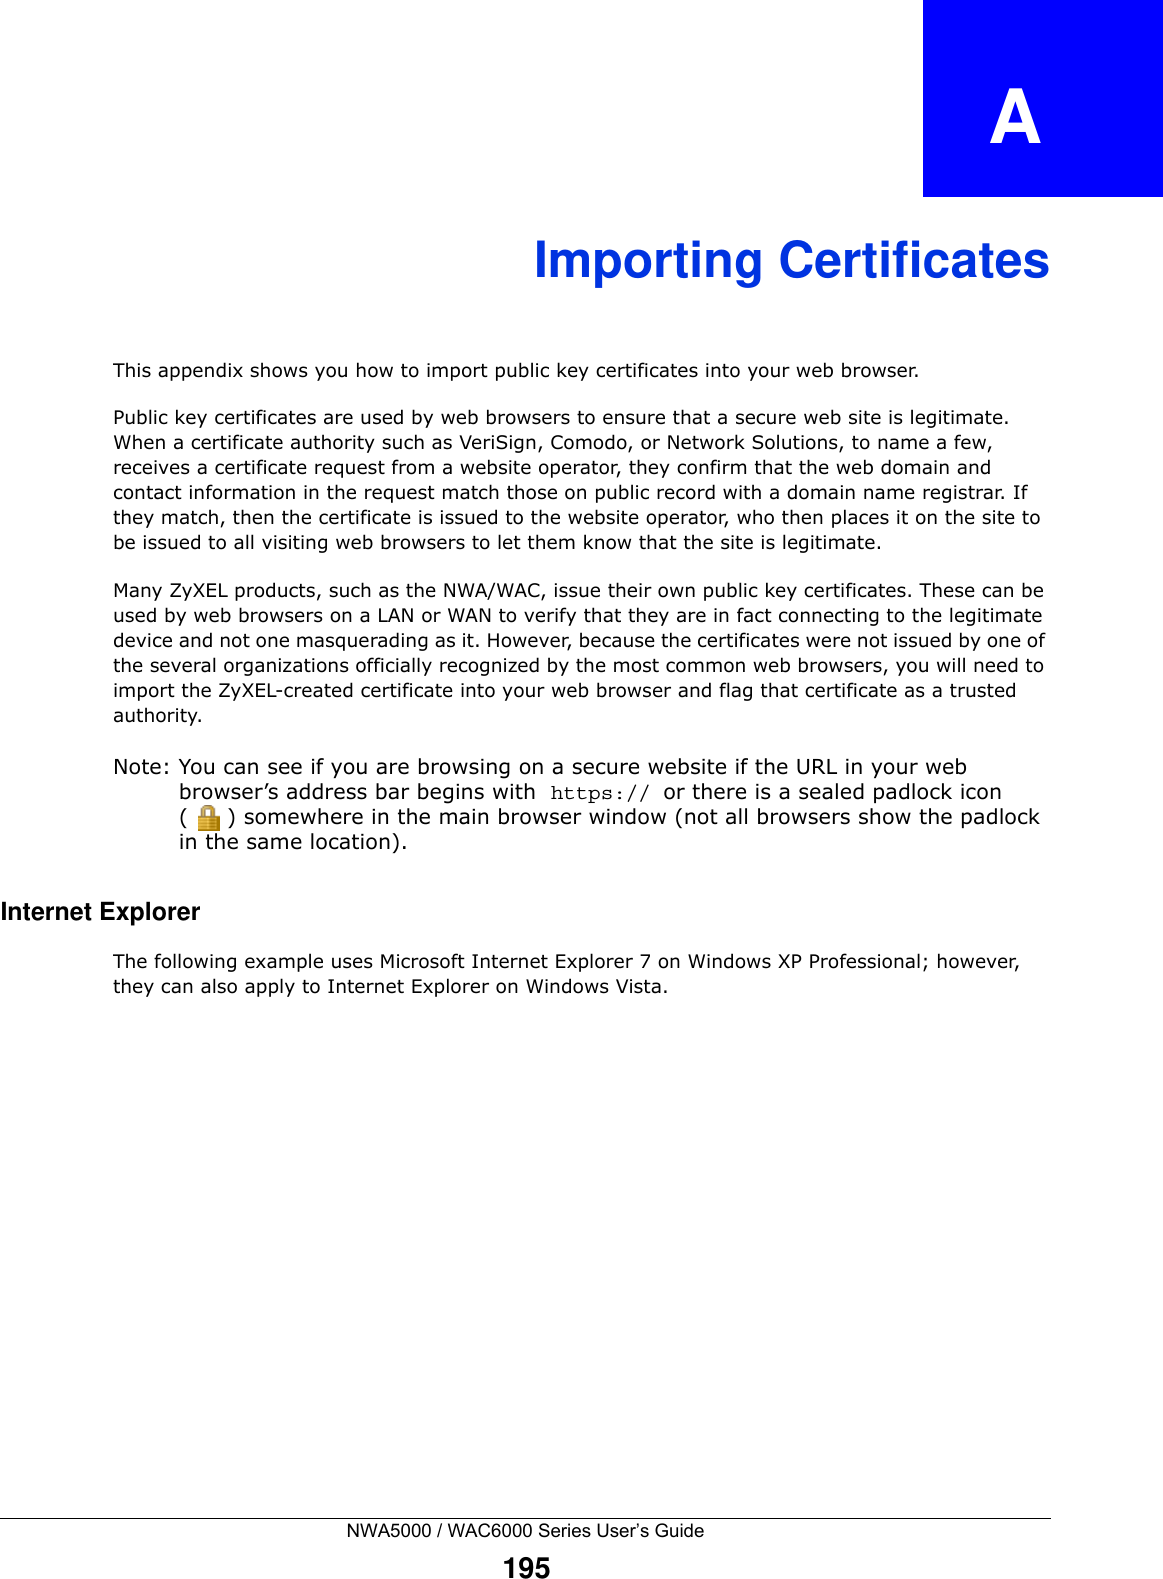 NWA5000 / WAC6000 Series User’s Guide195APPENDIX   AImporting CertificatesThis appendix shows you how to import public key certificates into your web browser. Public key certificates are used by web browsers to ensure that a secure web site is legitimate. When a certificate authority such as VeriSign, Comodo, or Network Solutions, to name a few, receives a certificate request from a website operator, they confirm that the web domain and contact information in the request match those on public record with a domain name registrar. If they match, then the certificate is issued to the website operator, who then places it on the site to be issued to all visiting web browsers to let them know that the site is legitimate.Many ZyXEL products, such as the NWA/WAC, issue their own public key certificates. These can be used by web browsers on a LAN or WAN to verify that they are in fact connecting to the legitimate device and not one masquerading as it. However, because the certificates were not issued by one of the several organizations officially recognized by the most common web browsers, you will need to import the ZyXEL-created certificate into your web browser and flag that certificate as a trusted authority.Note: You can see if you are browsing on a secure website if the URL in your web browser’s address bar begins with  https:// or there is a sealed padlock icon ( ) somewhere in the main browser window (not all browsers show the padlock in the same location).Internet ExplorerThe following example uses Microsoft Internet Explorer 7 on Windows XP Professional; however, they can also apply to Internet Explorer on Windows Vista.